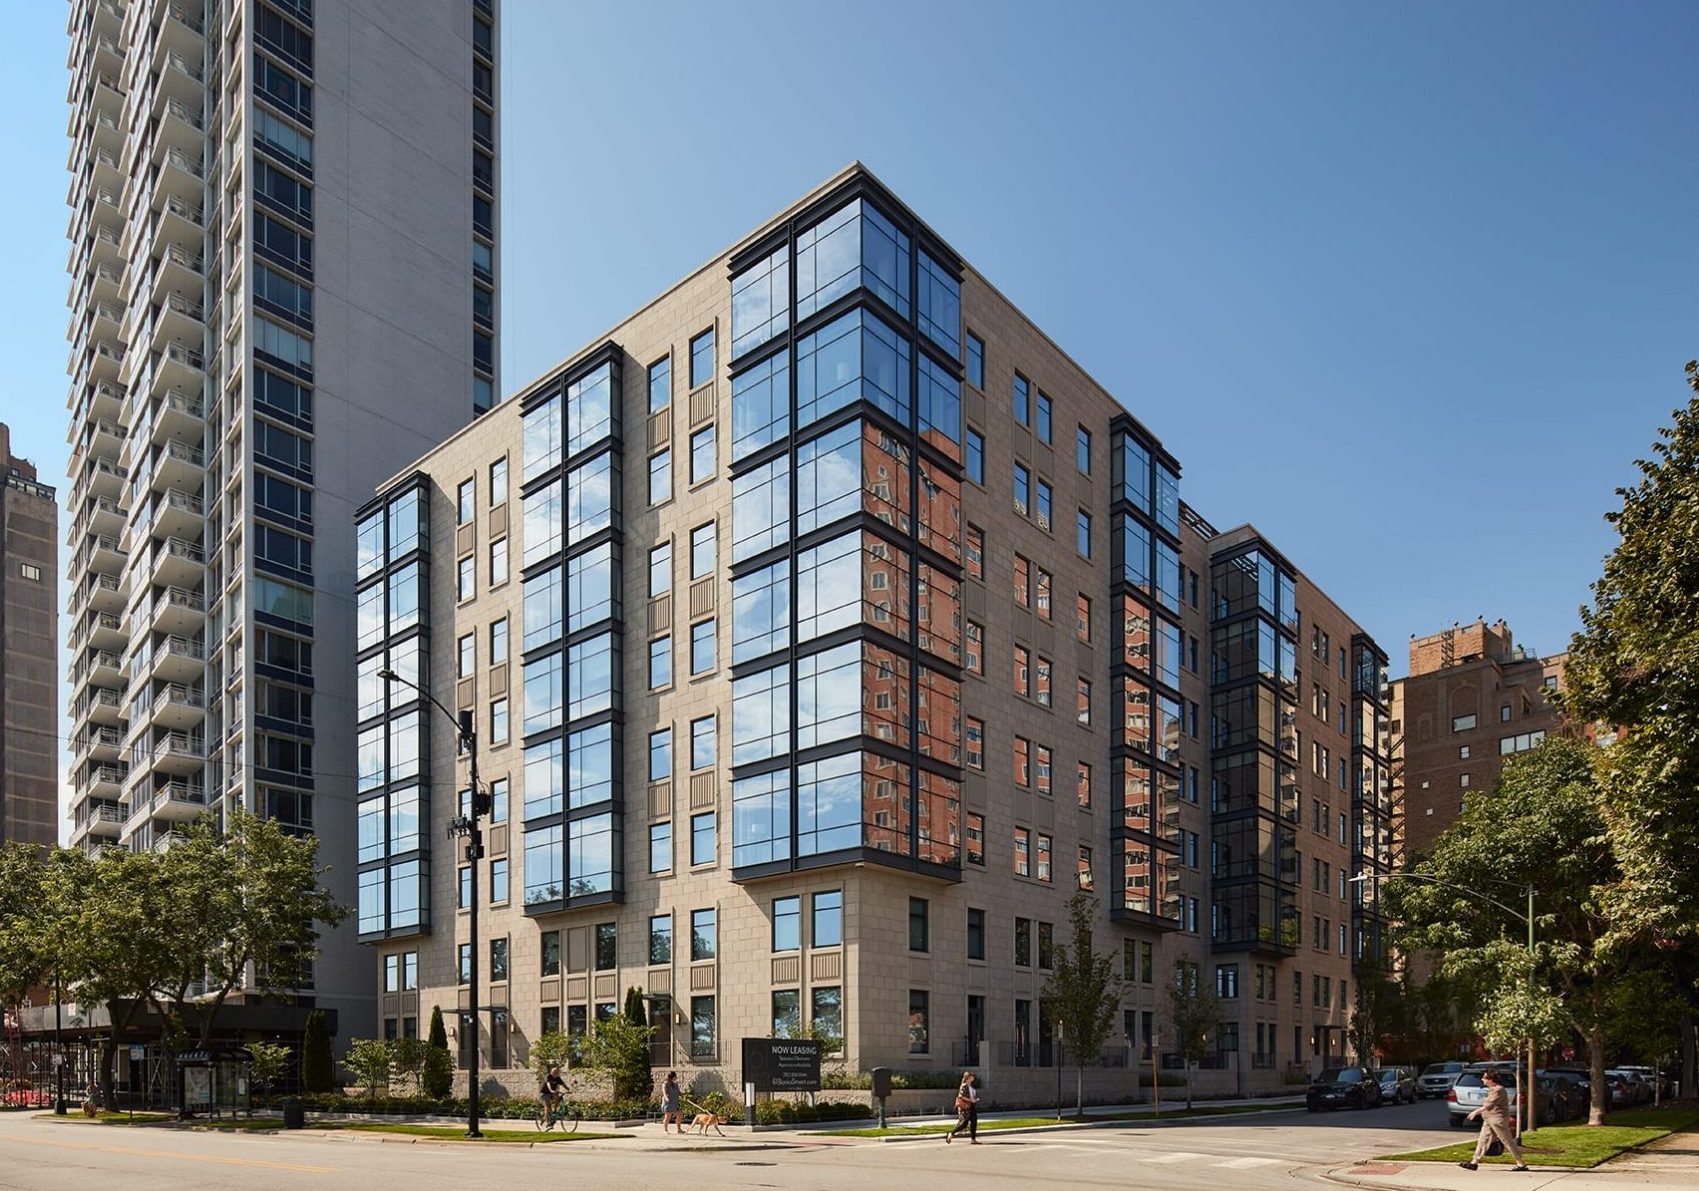 61 East Banks Street Condominiums (2019). Photo by Troy Walsh